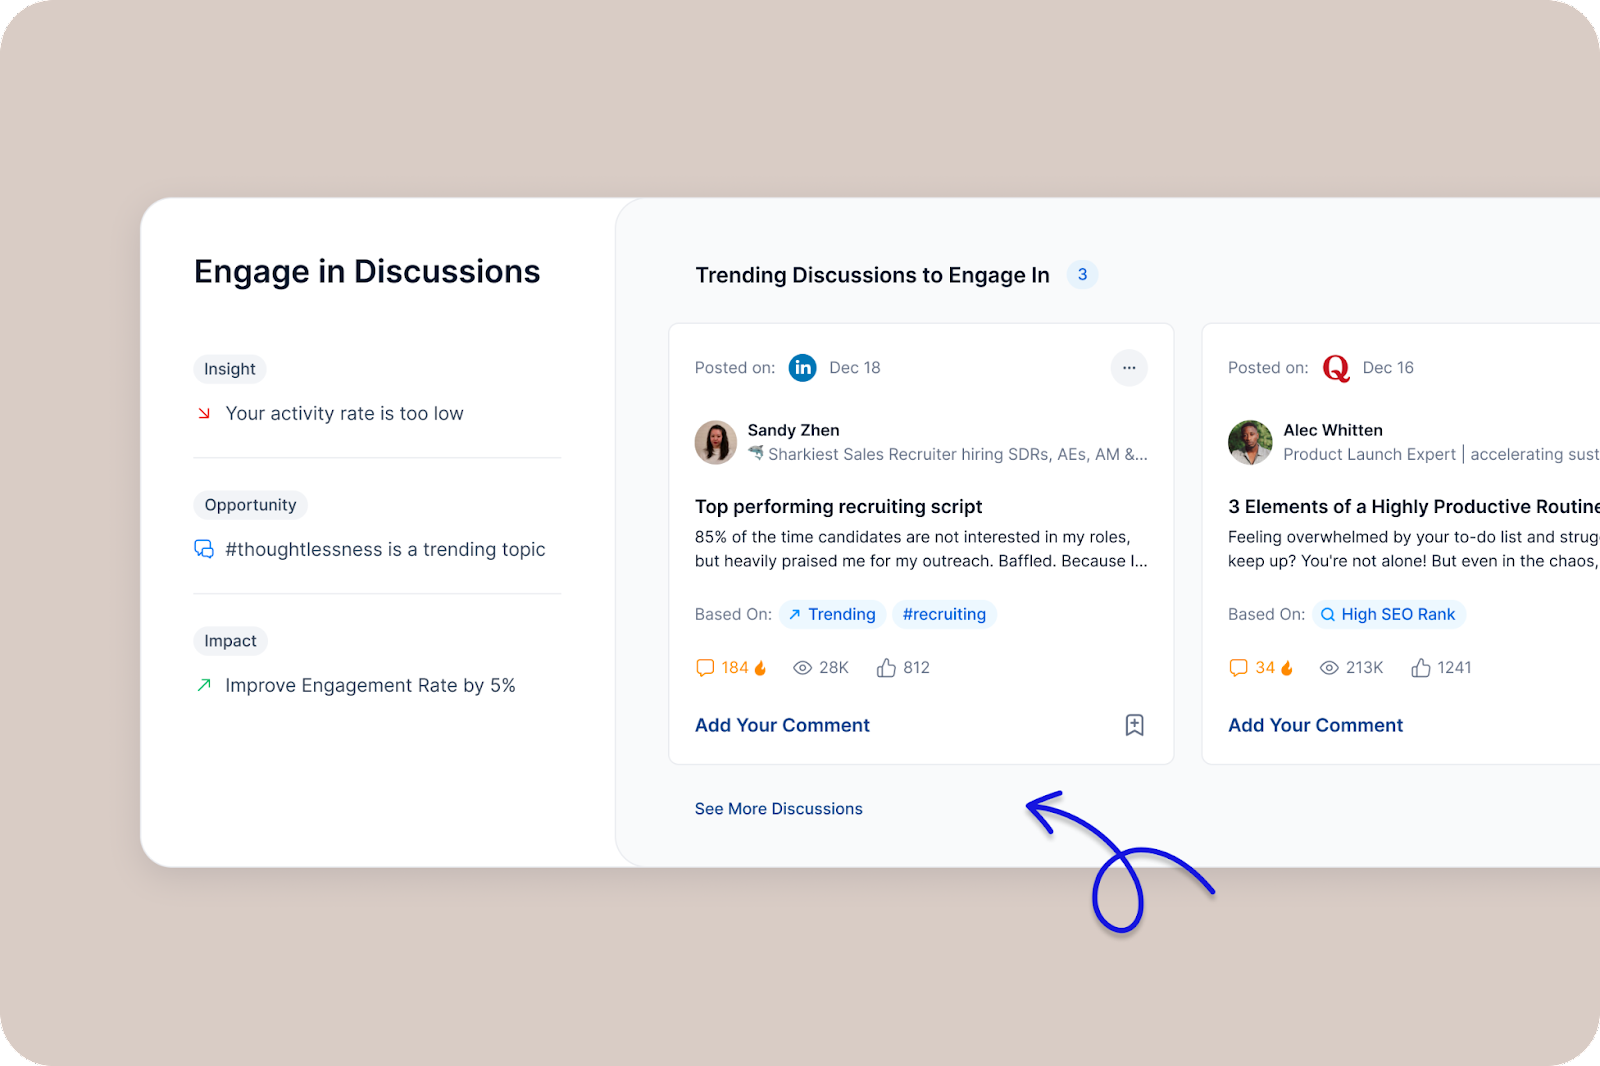 The 'Engage in Discussions' panel on Queue, showing an alert for low activity rate, a trending topic suggestion for engagement, and a goal to improve engagement rate, alongside two examples of trending discussions to engage in.